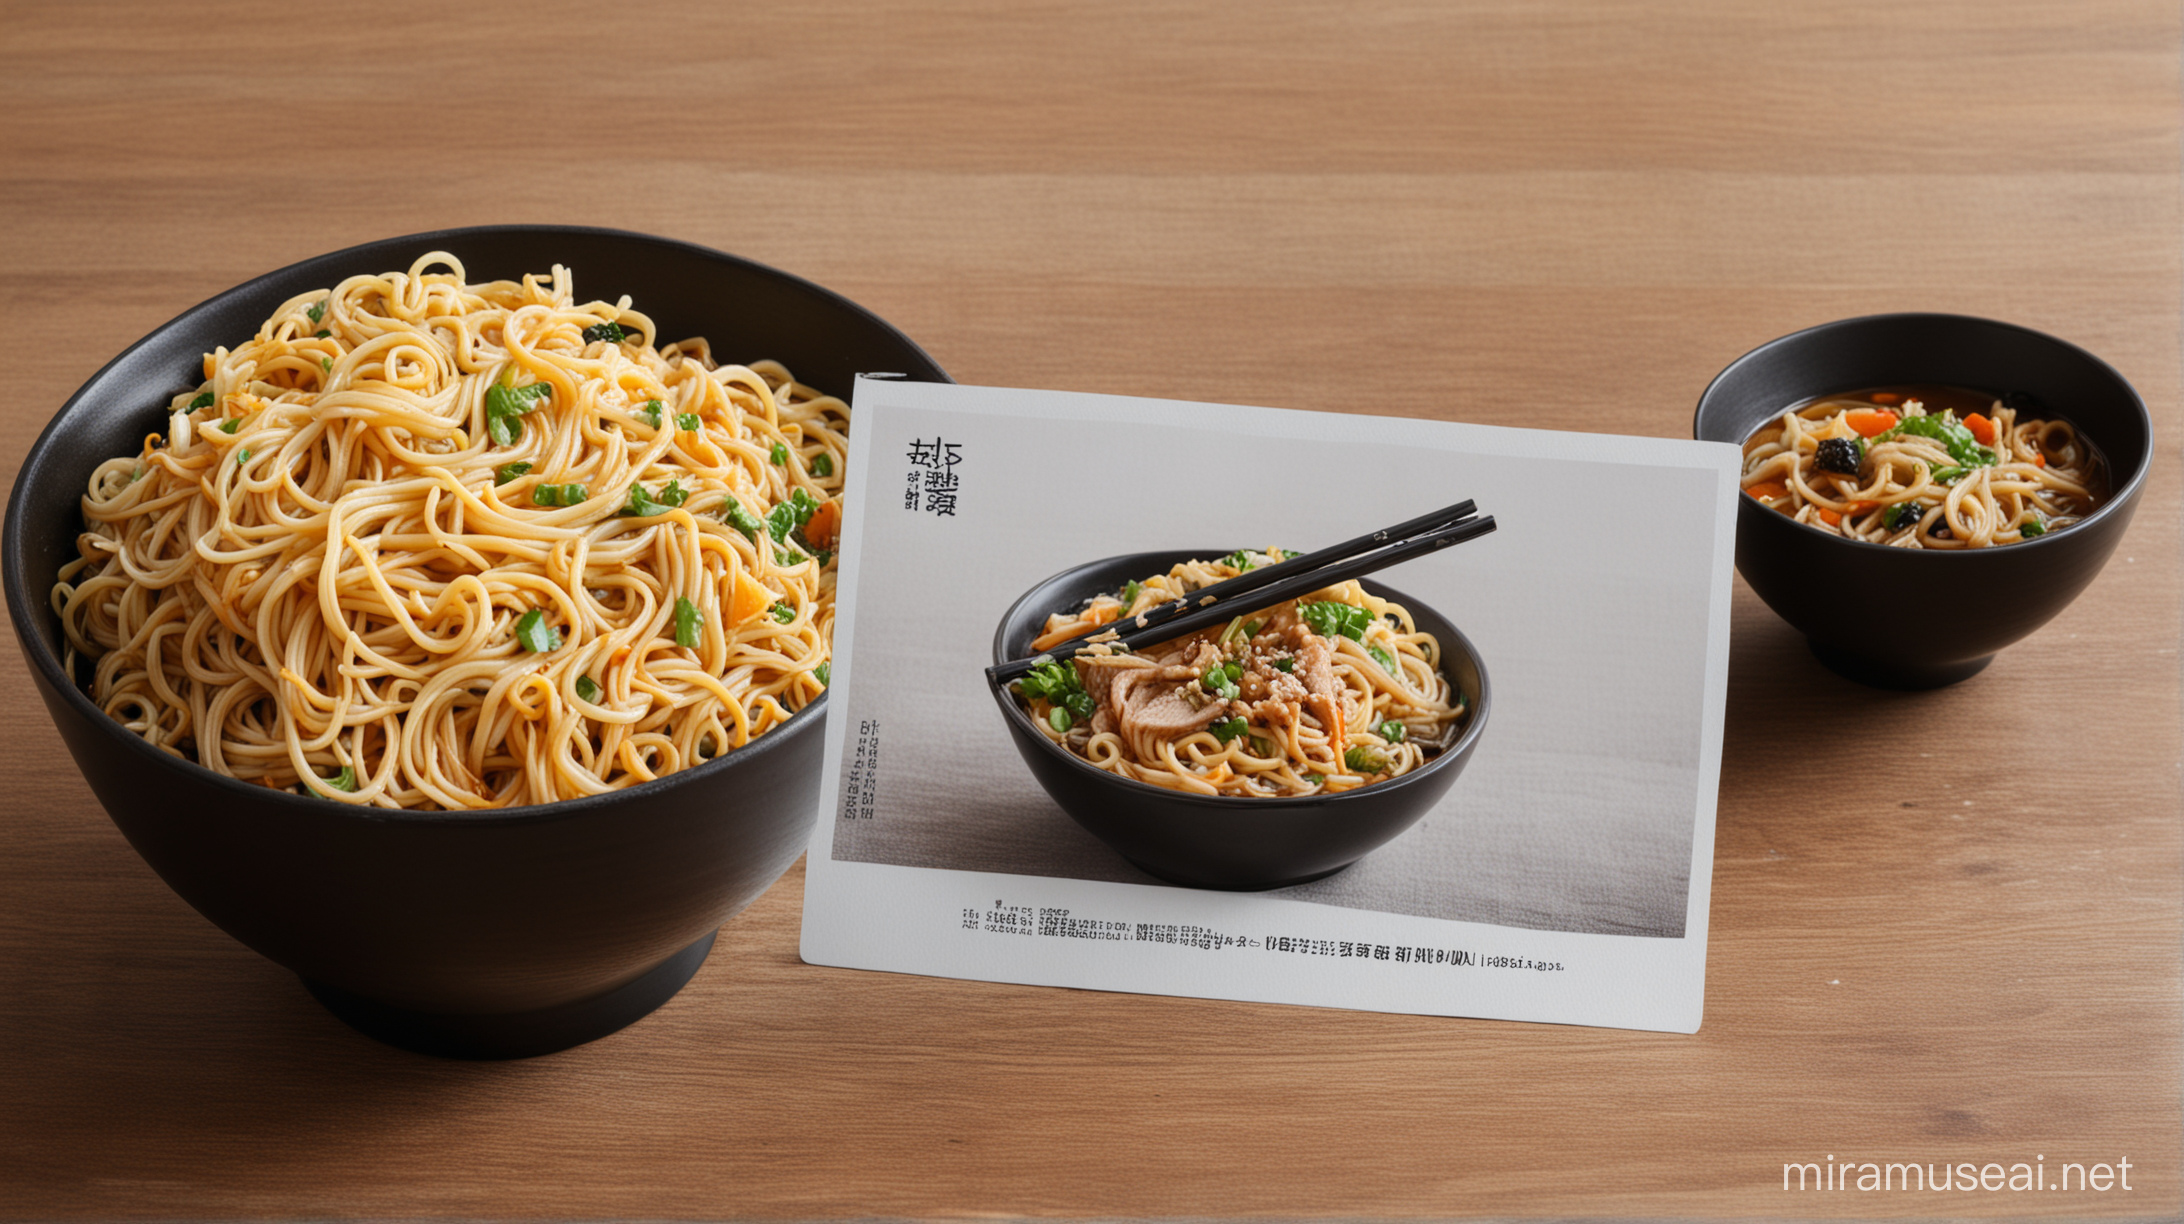 Table Setting with Postcard and Noodles in Black Bowl